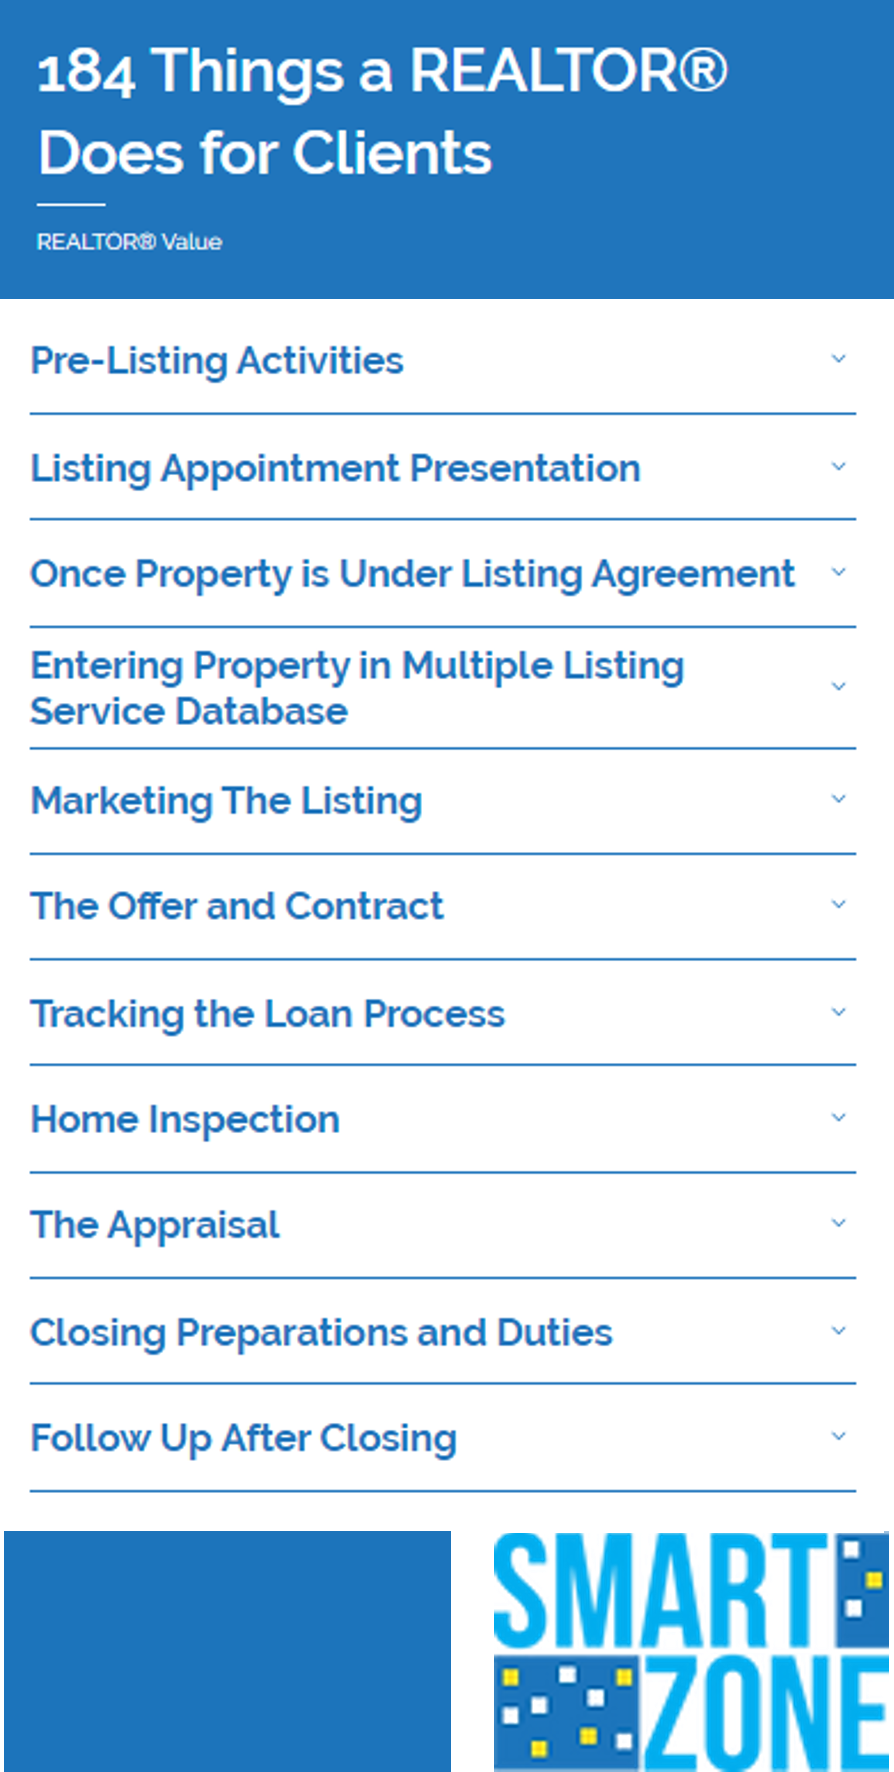 184 Things Realtors Do for Clients ad and link to article